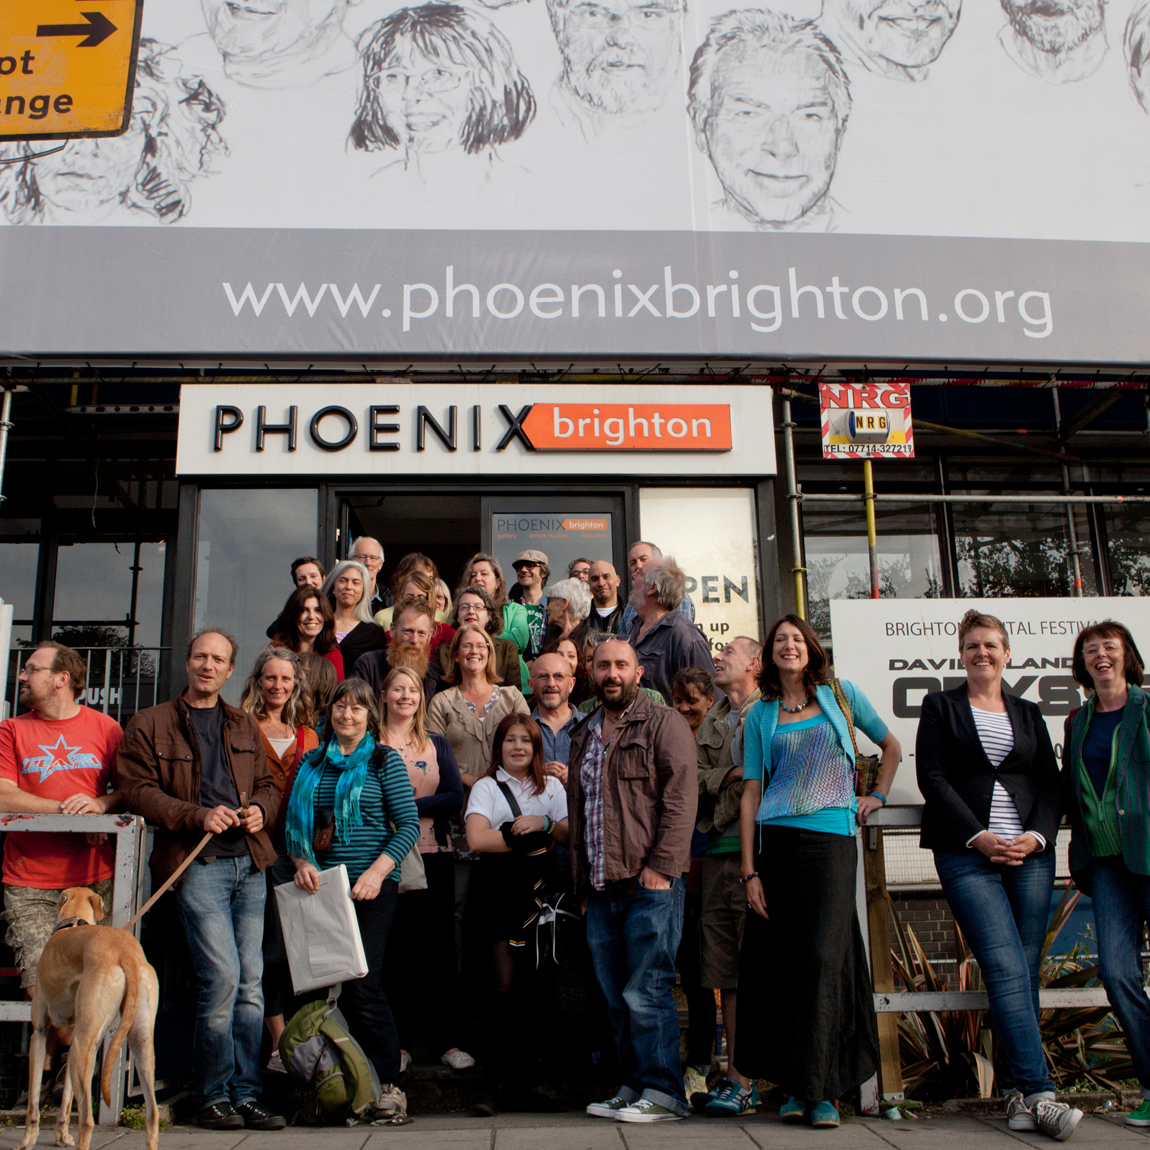 Phoenix artists under Portrait of the artist - the face behind the facade.jpg